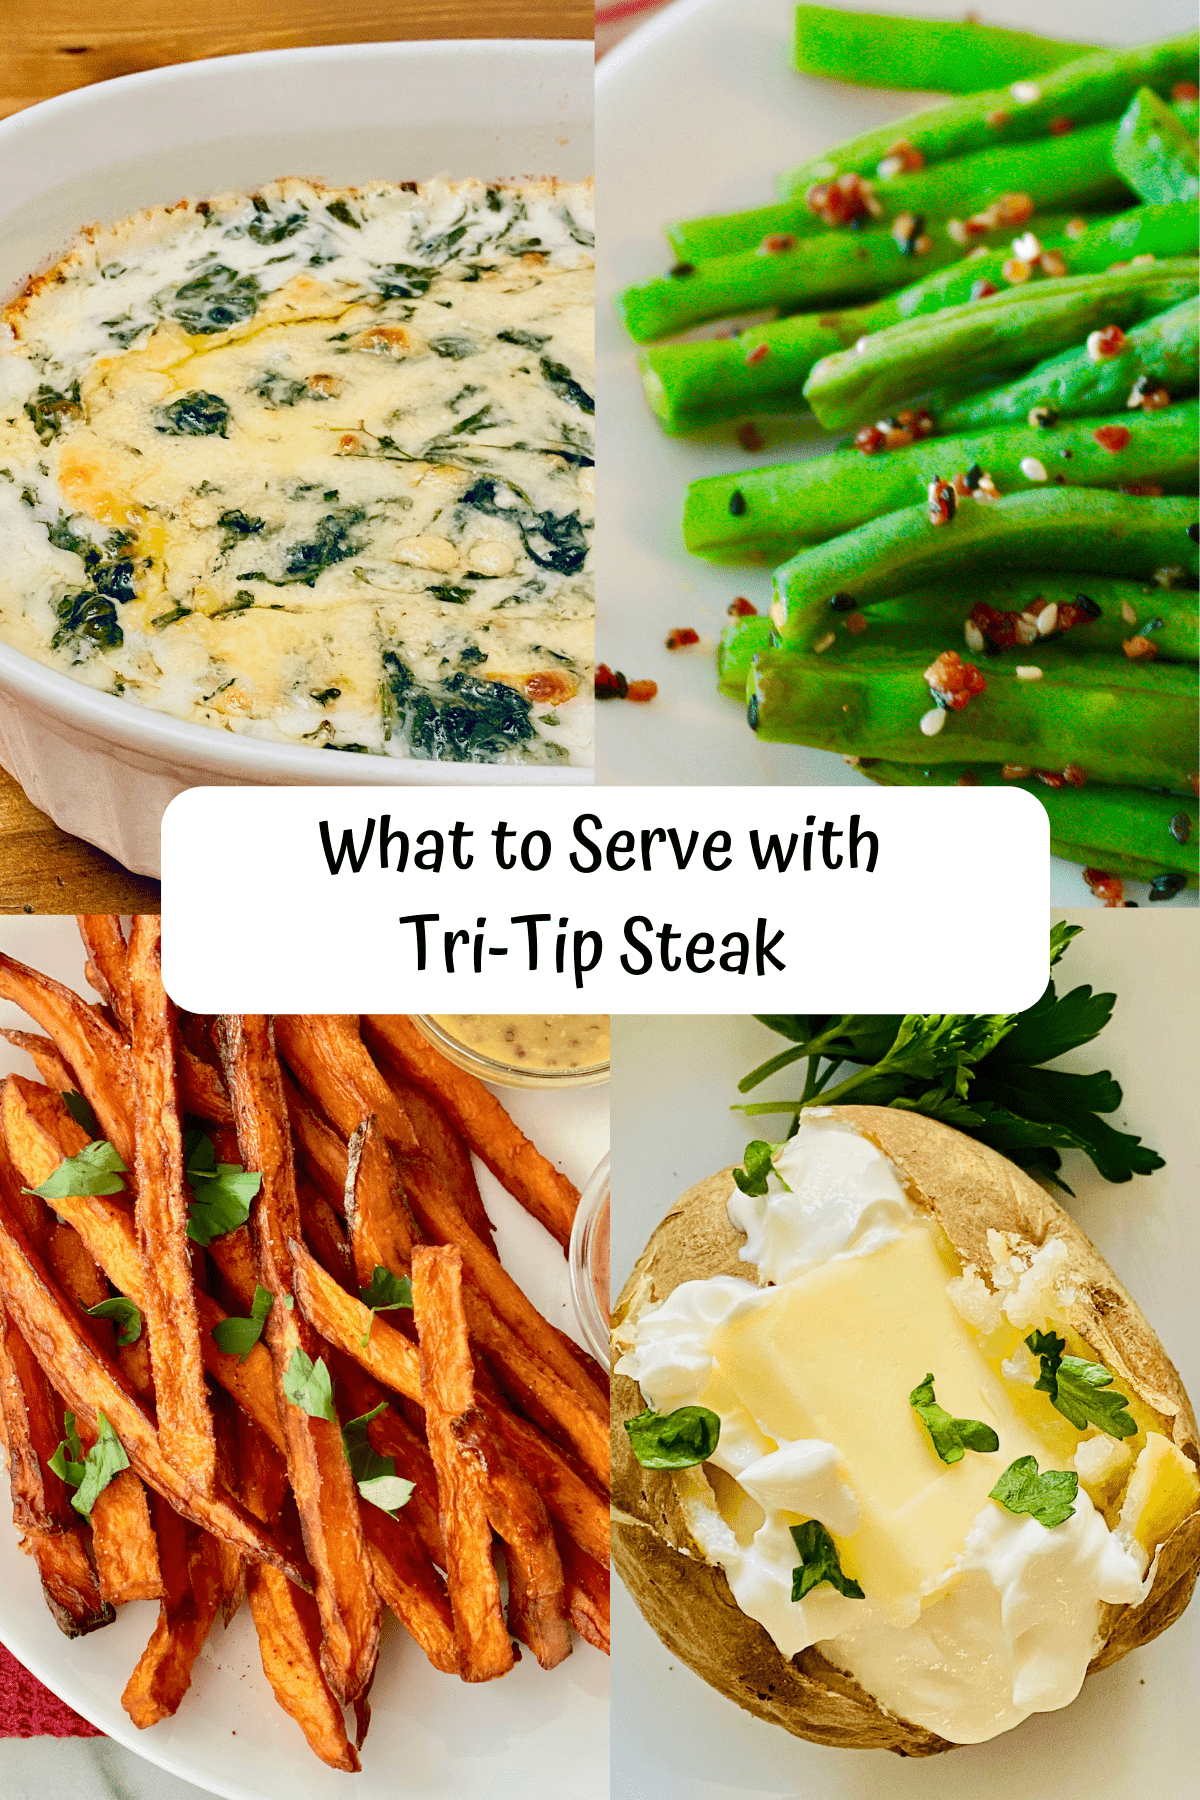 4 recipe images for creamed spinach green beans sweet potato fries and toaster oven baked potato